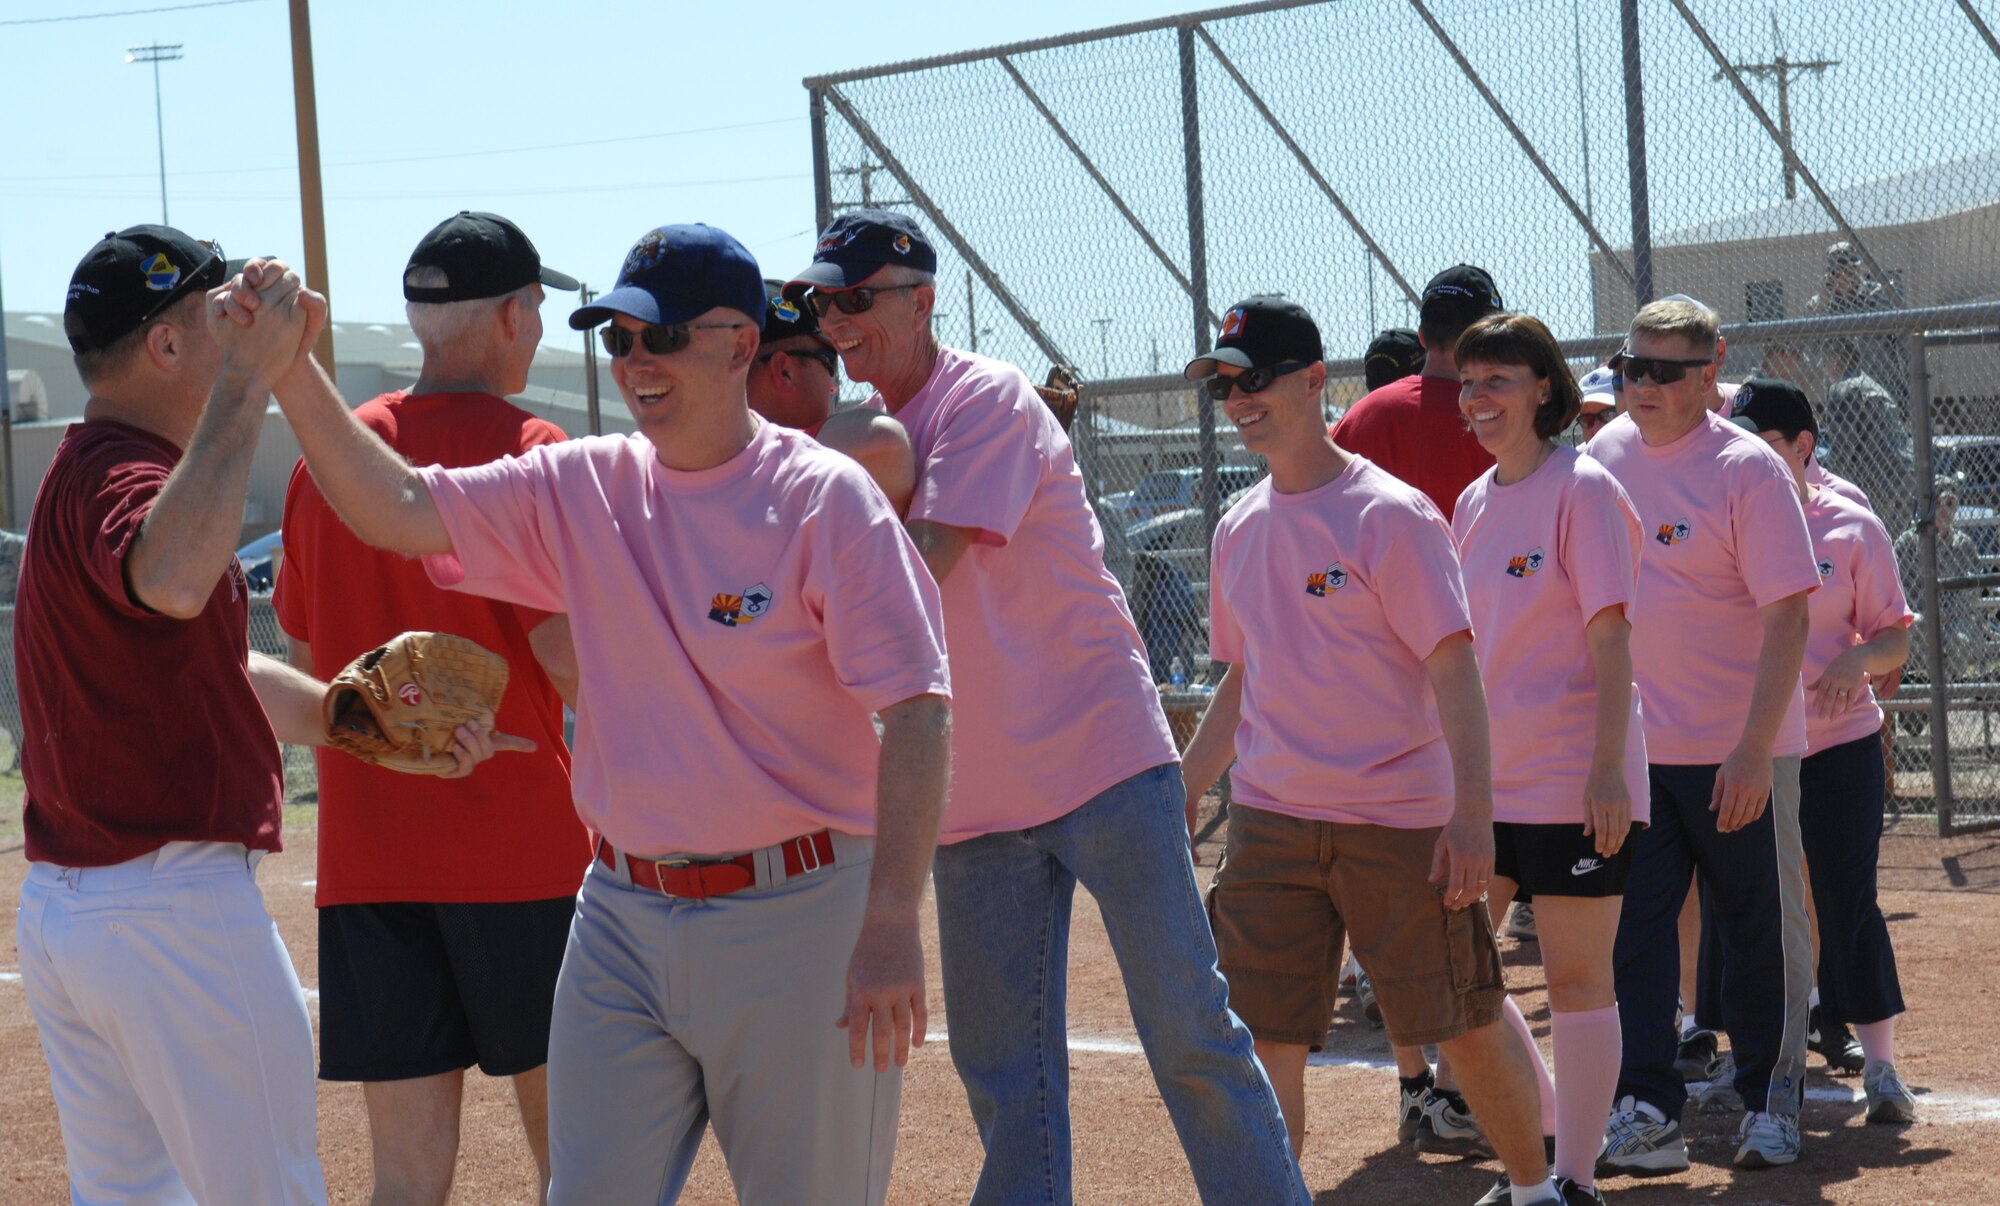 U.S. Air Force participants in the Chiefs vs. Eagles softball game congratulate each other on a game well played at Thunderbolt Field on Davis-Monthan Air Force Base, Ariz., March 23. The annual charity game was won by the Eagles, with a final score of 15-14. (U.S. Air Force photo by Airman 1st Class Saphfire Cook/Released)